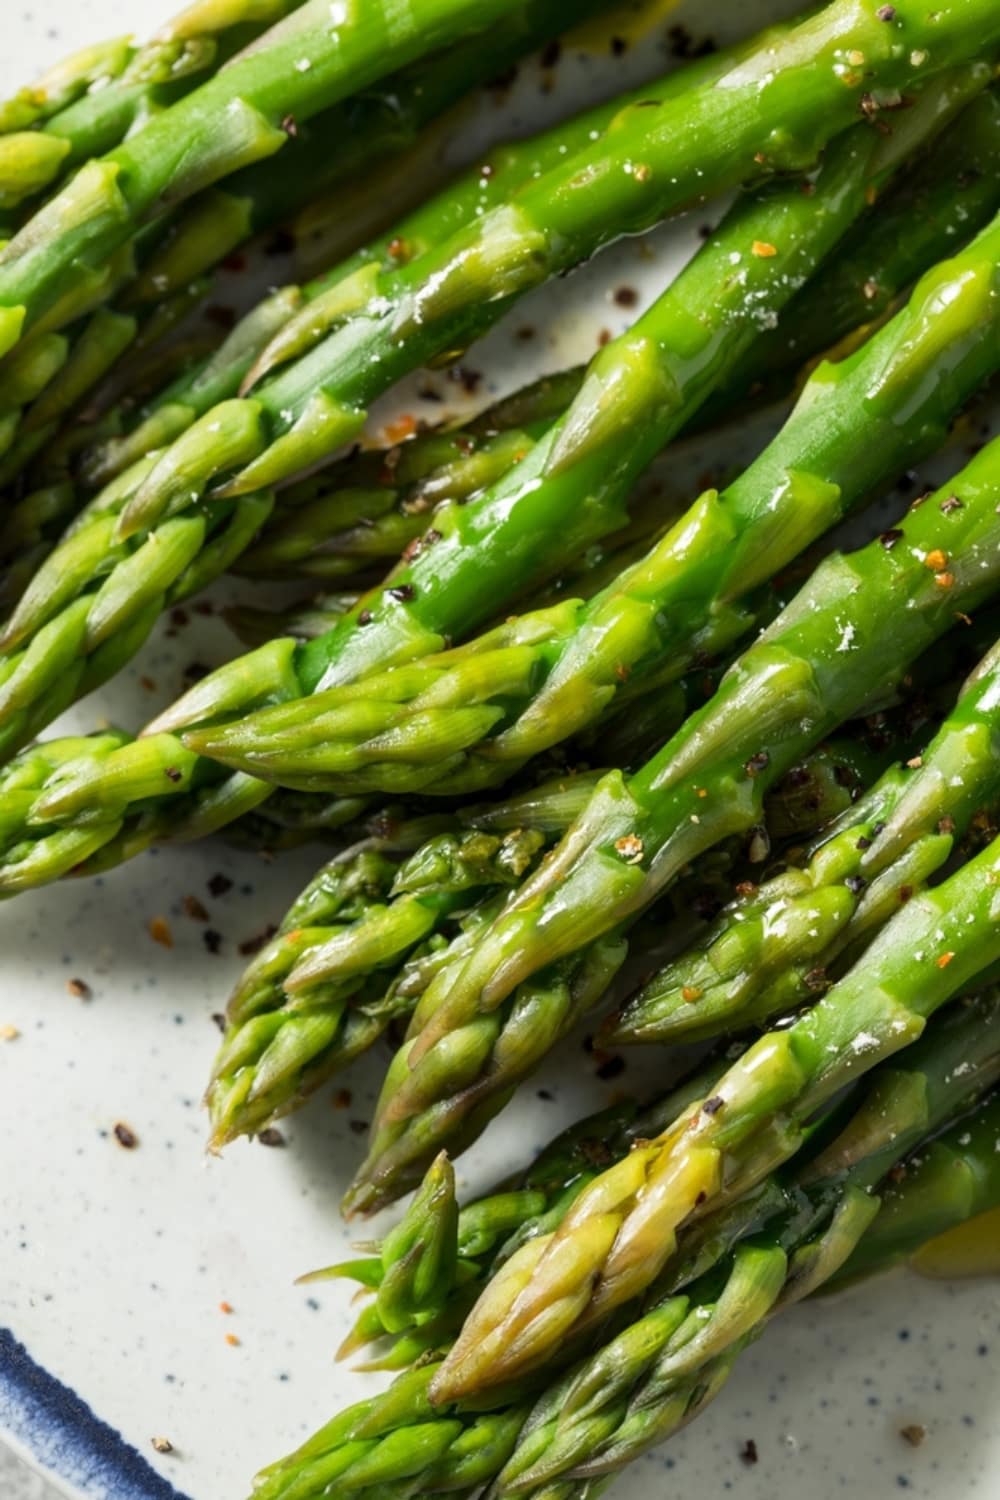 How Long to Bake Asparagus at 350 (Easy Recipe) featuring Seasoned and Roasted Asparagus on a Platter